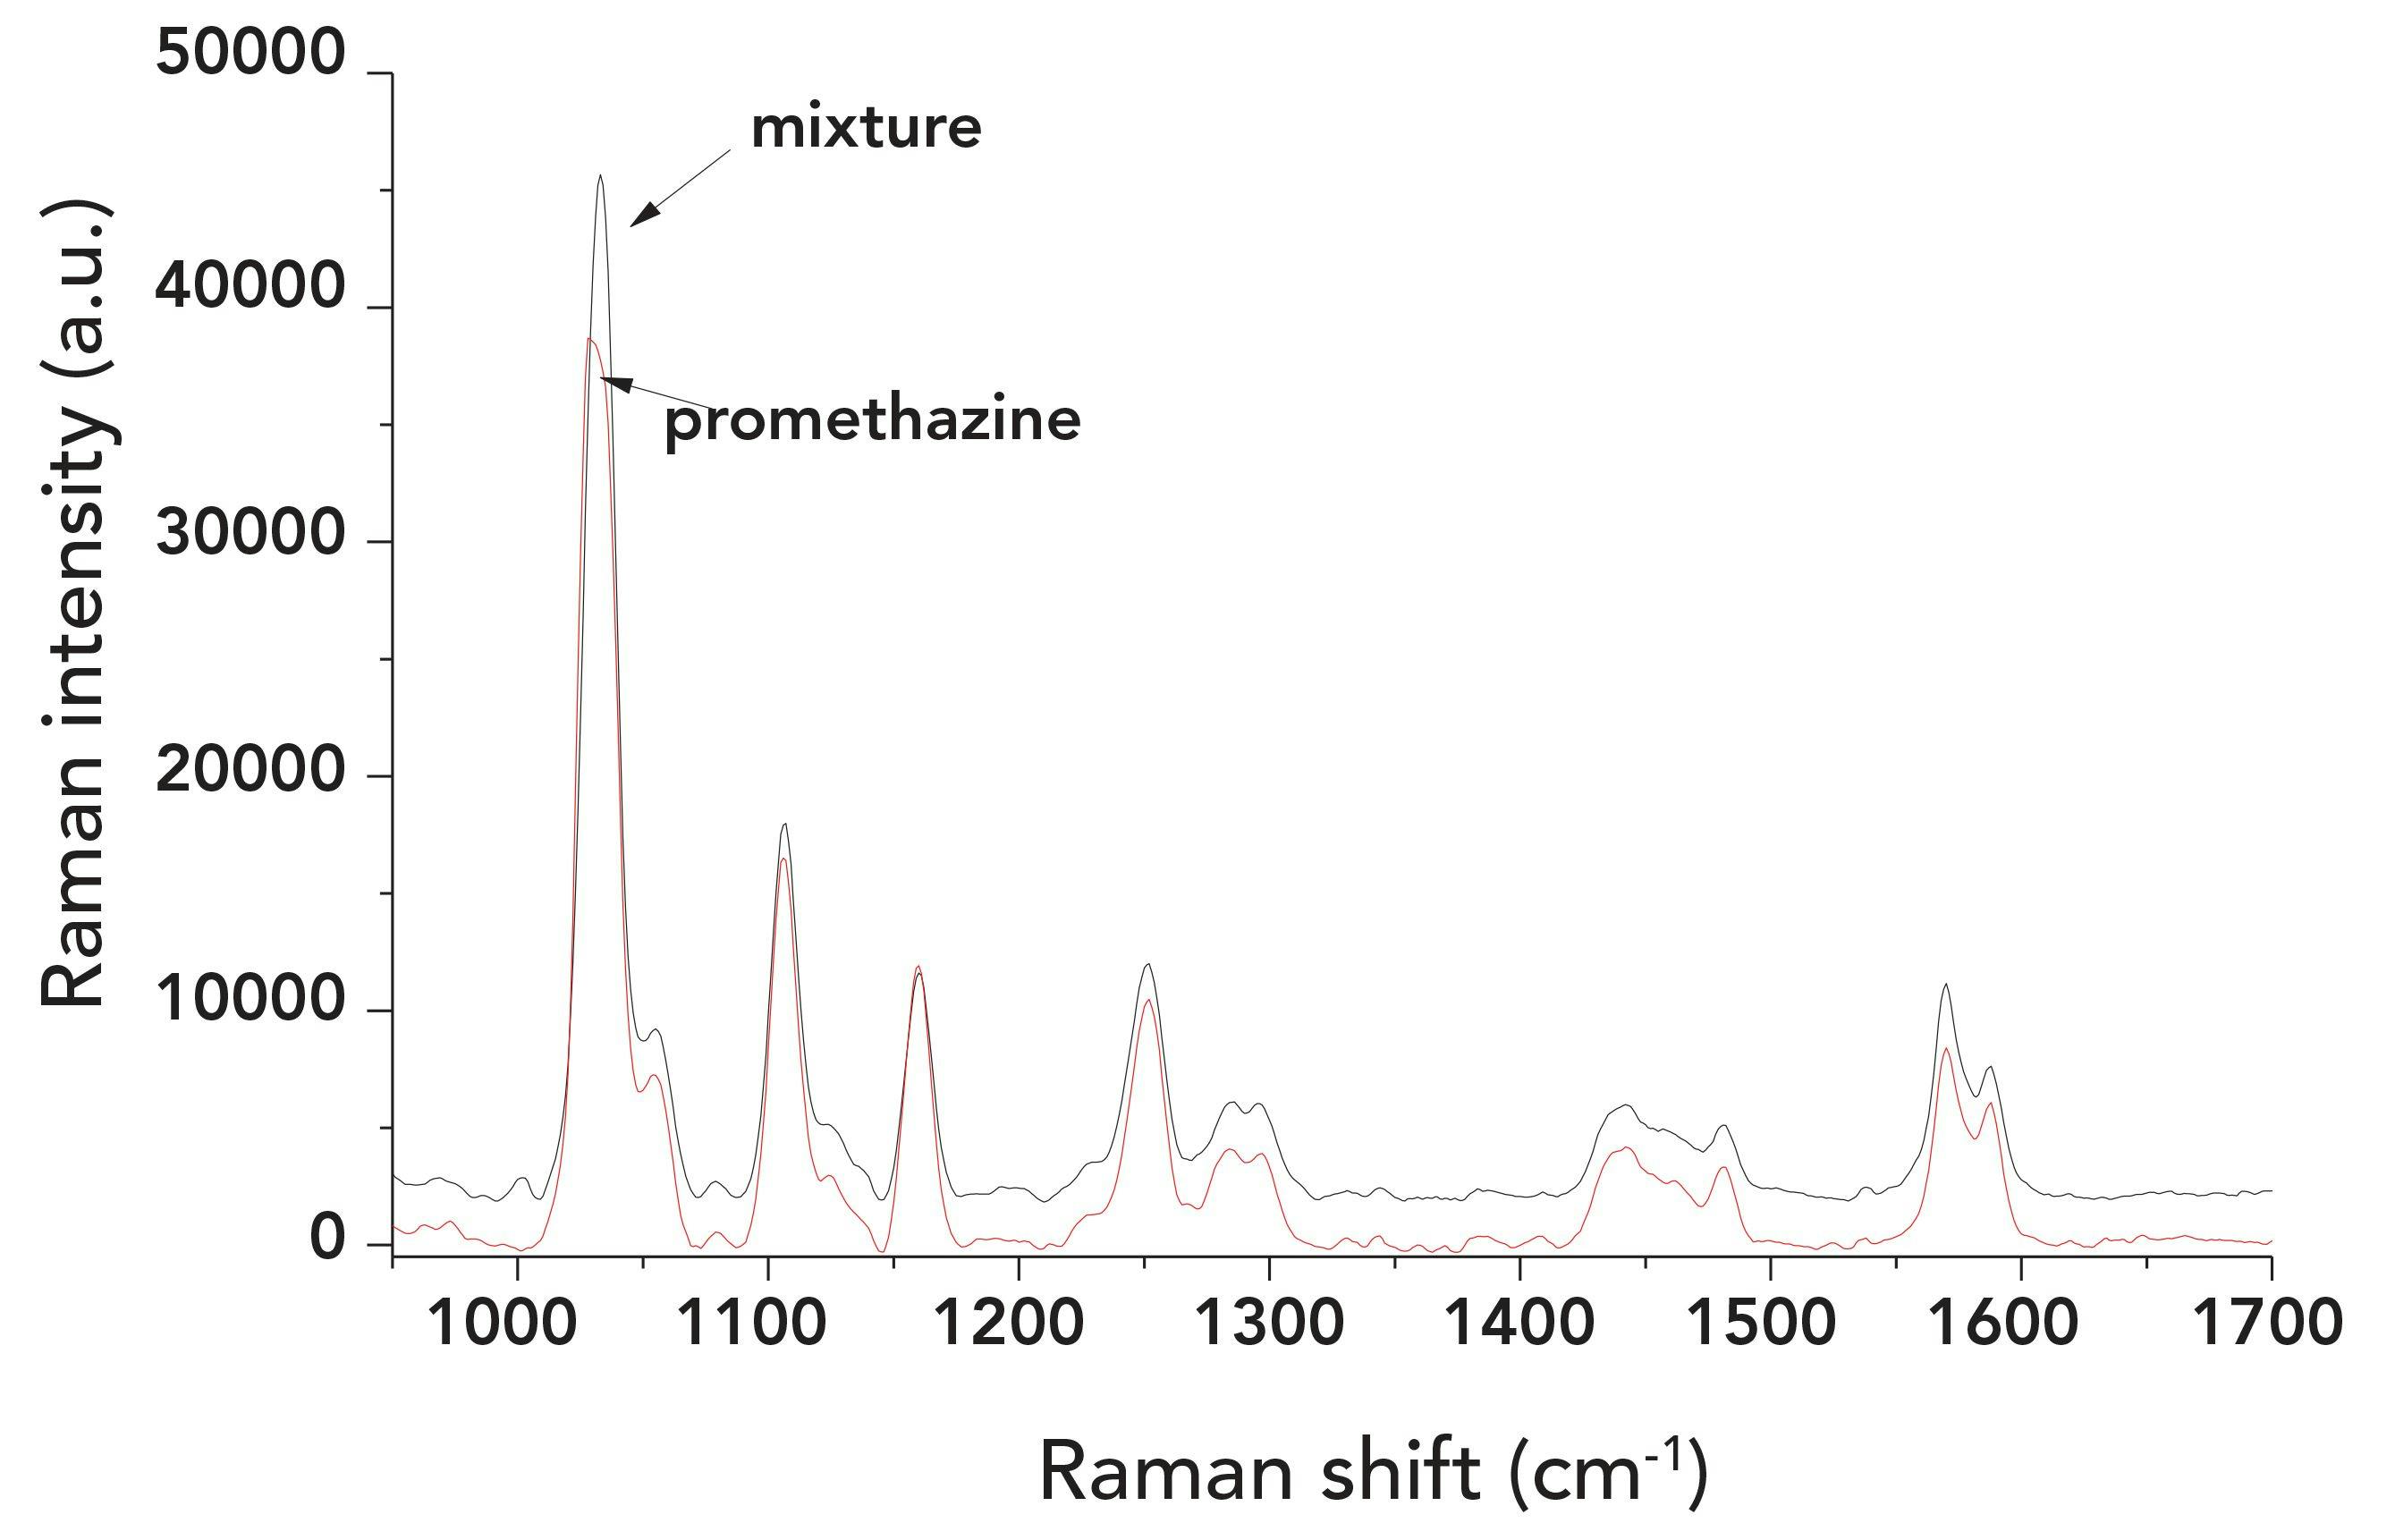 FIGURE 5: Comparison of SERS spectra between mixture and promethazine.